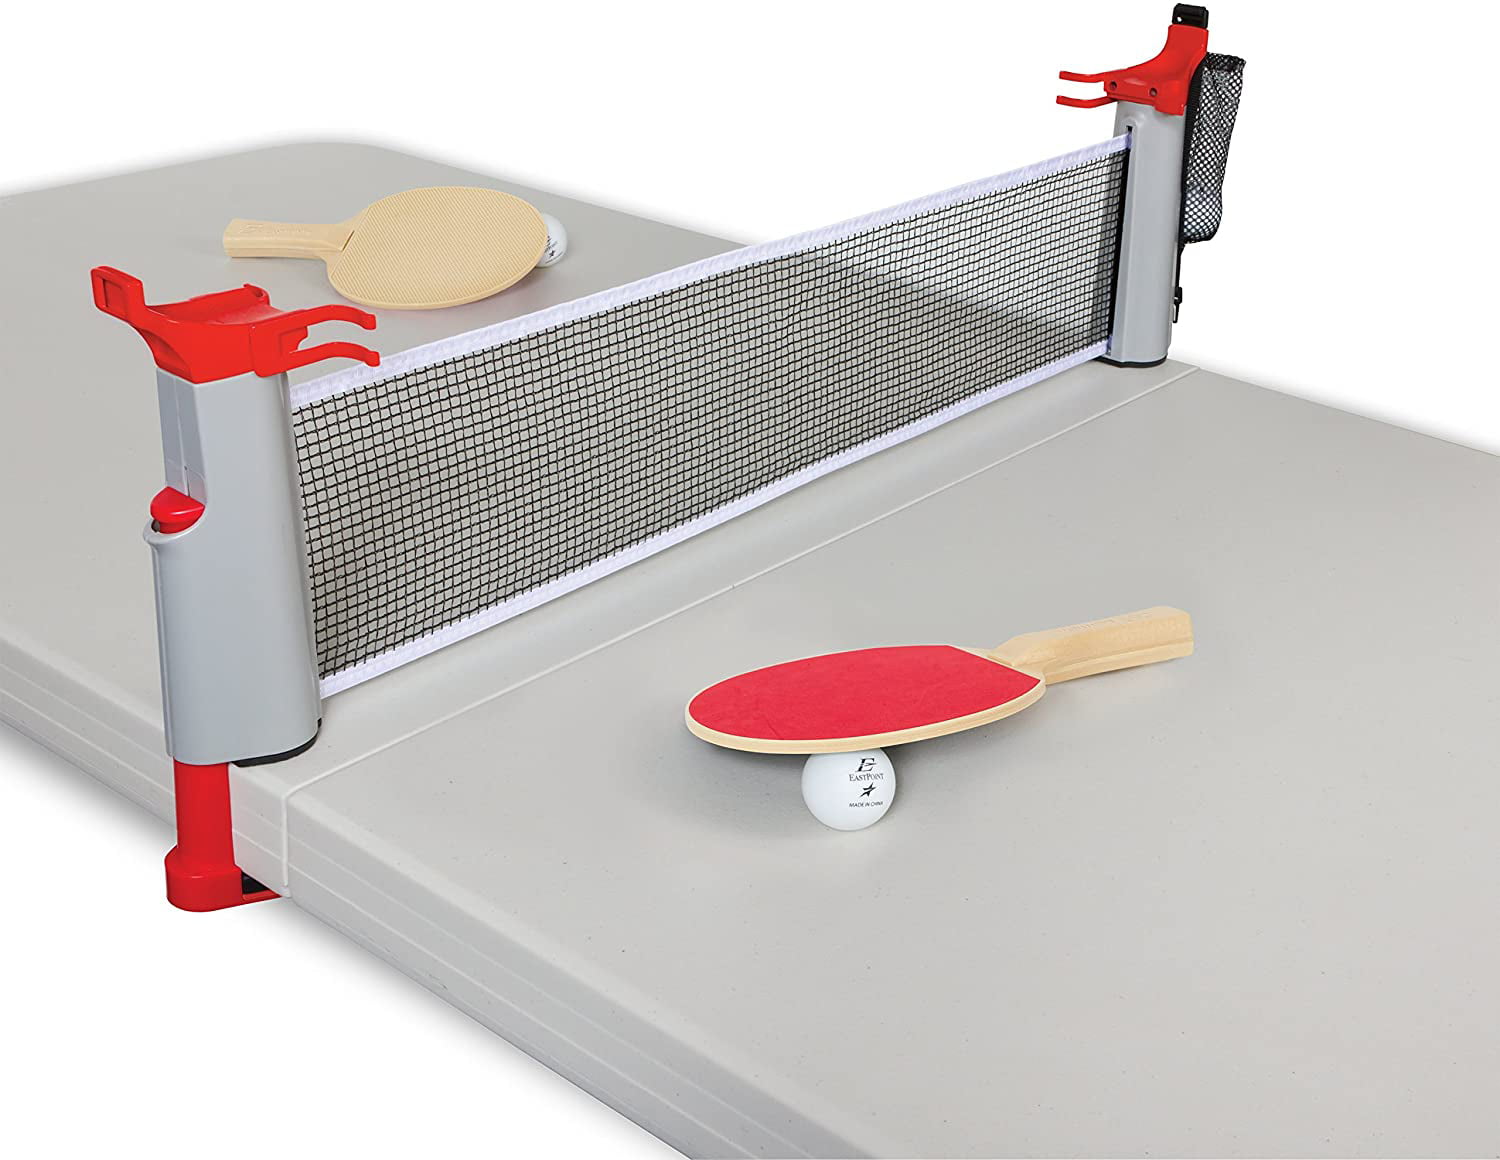 EastPoint Sports Everywhere Table Tennis Set With Molded Paddles for sale online 